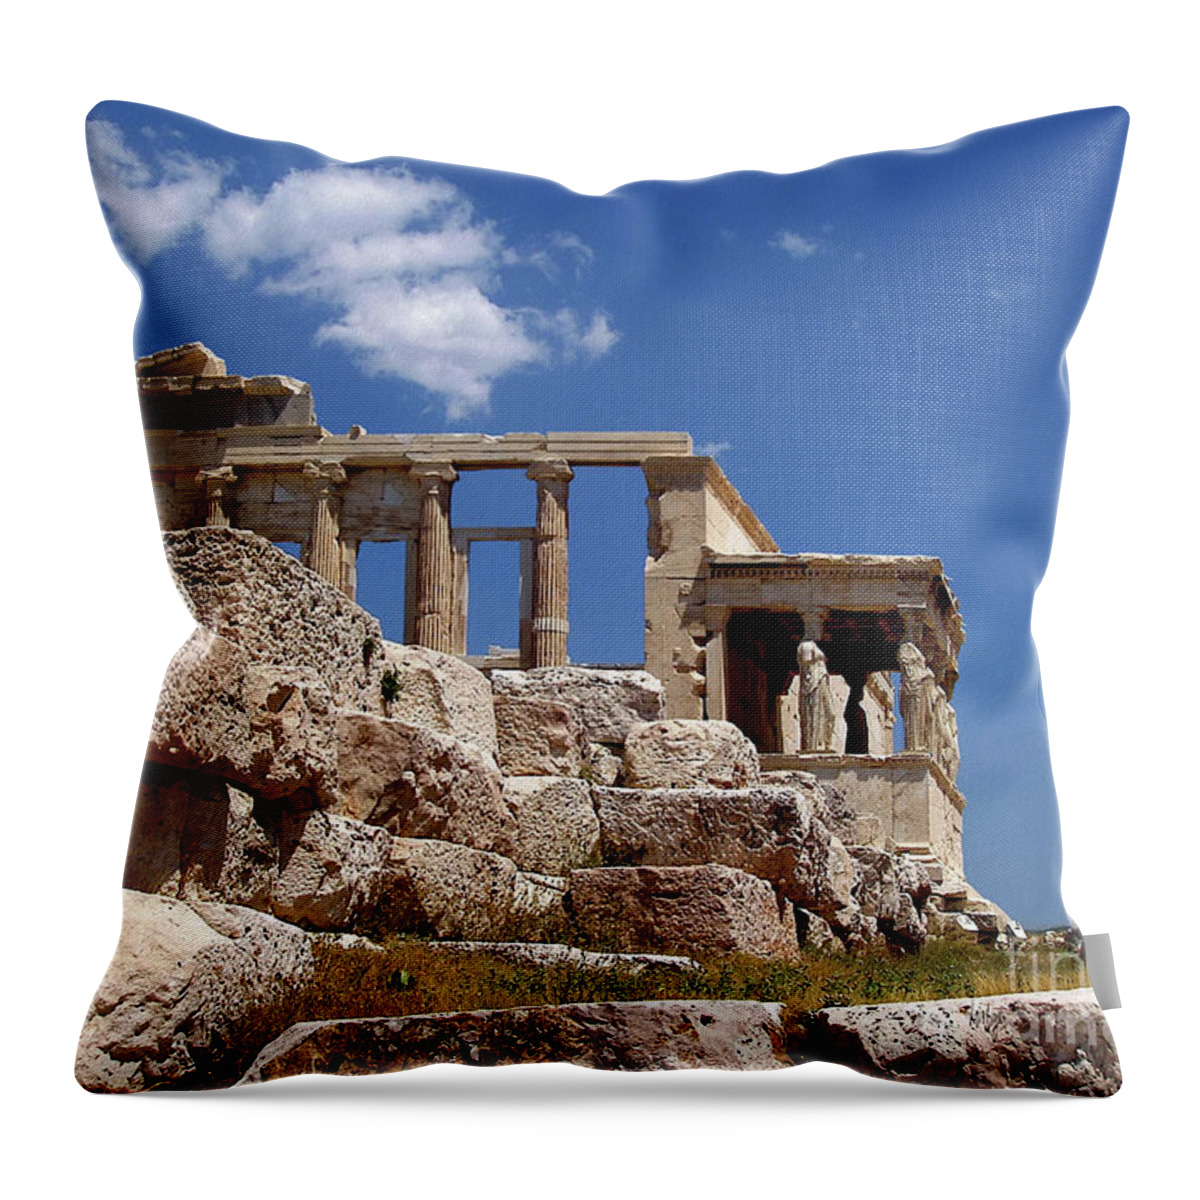 Greece Throw Pillow featuring the photograph The Caryatids Of The Athenian Acropolis by Lois Bryan